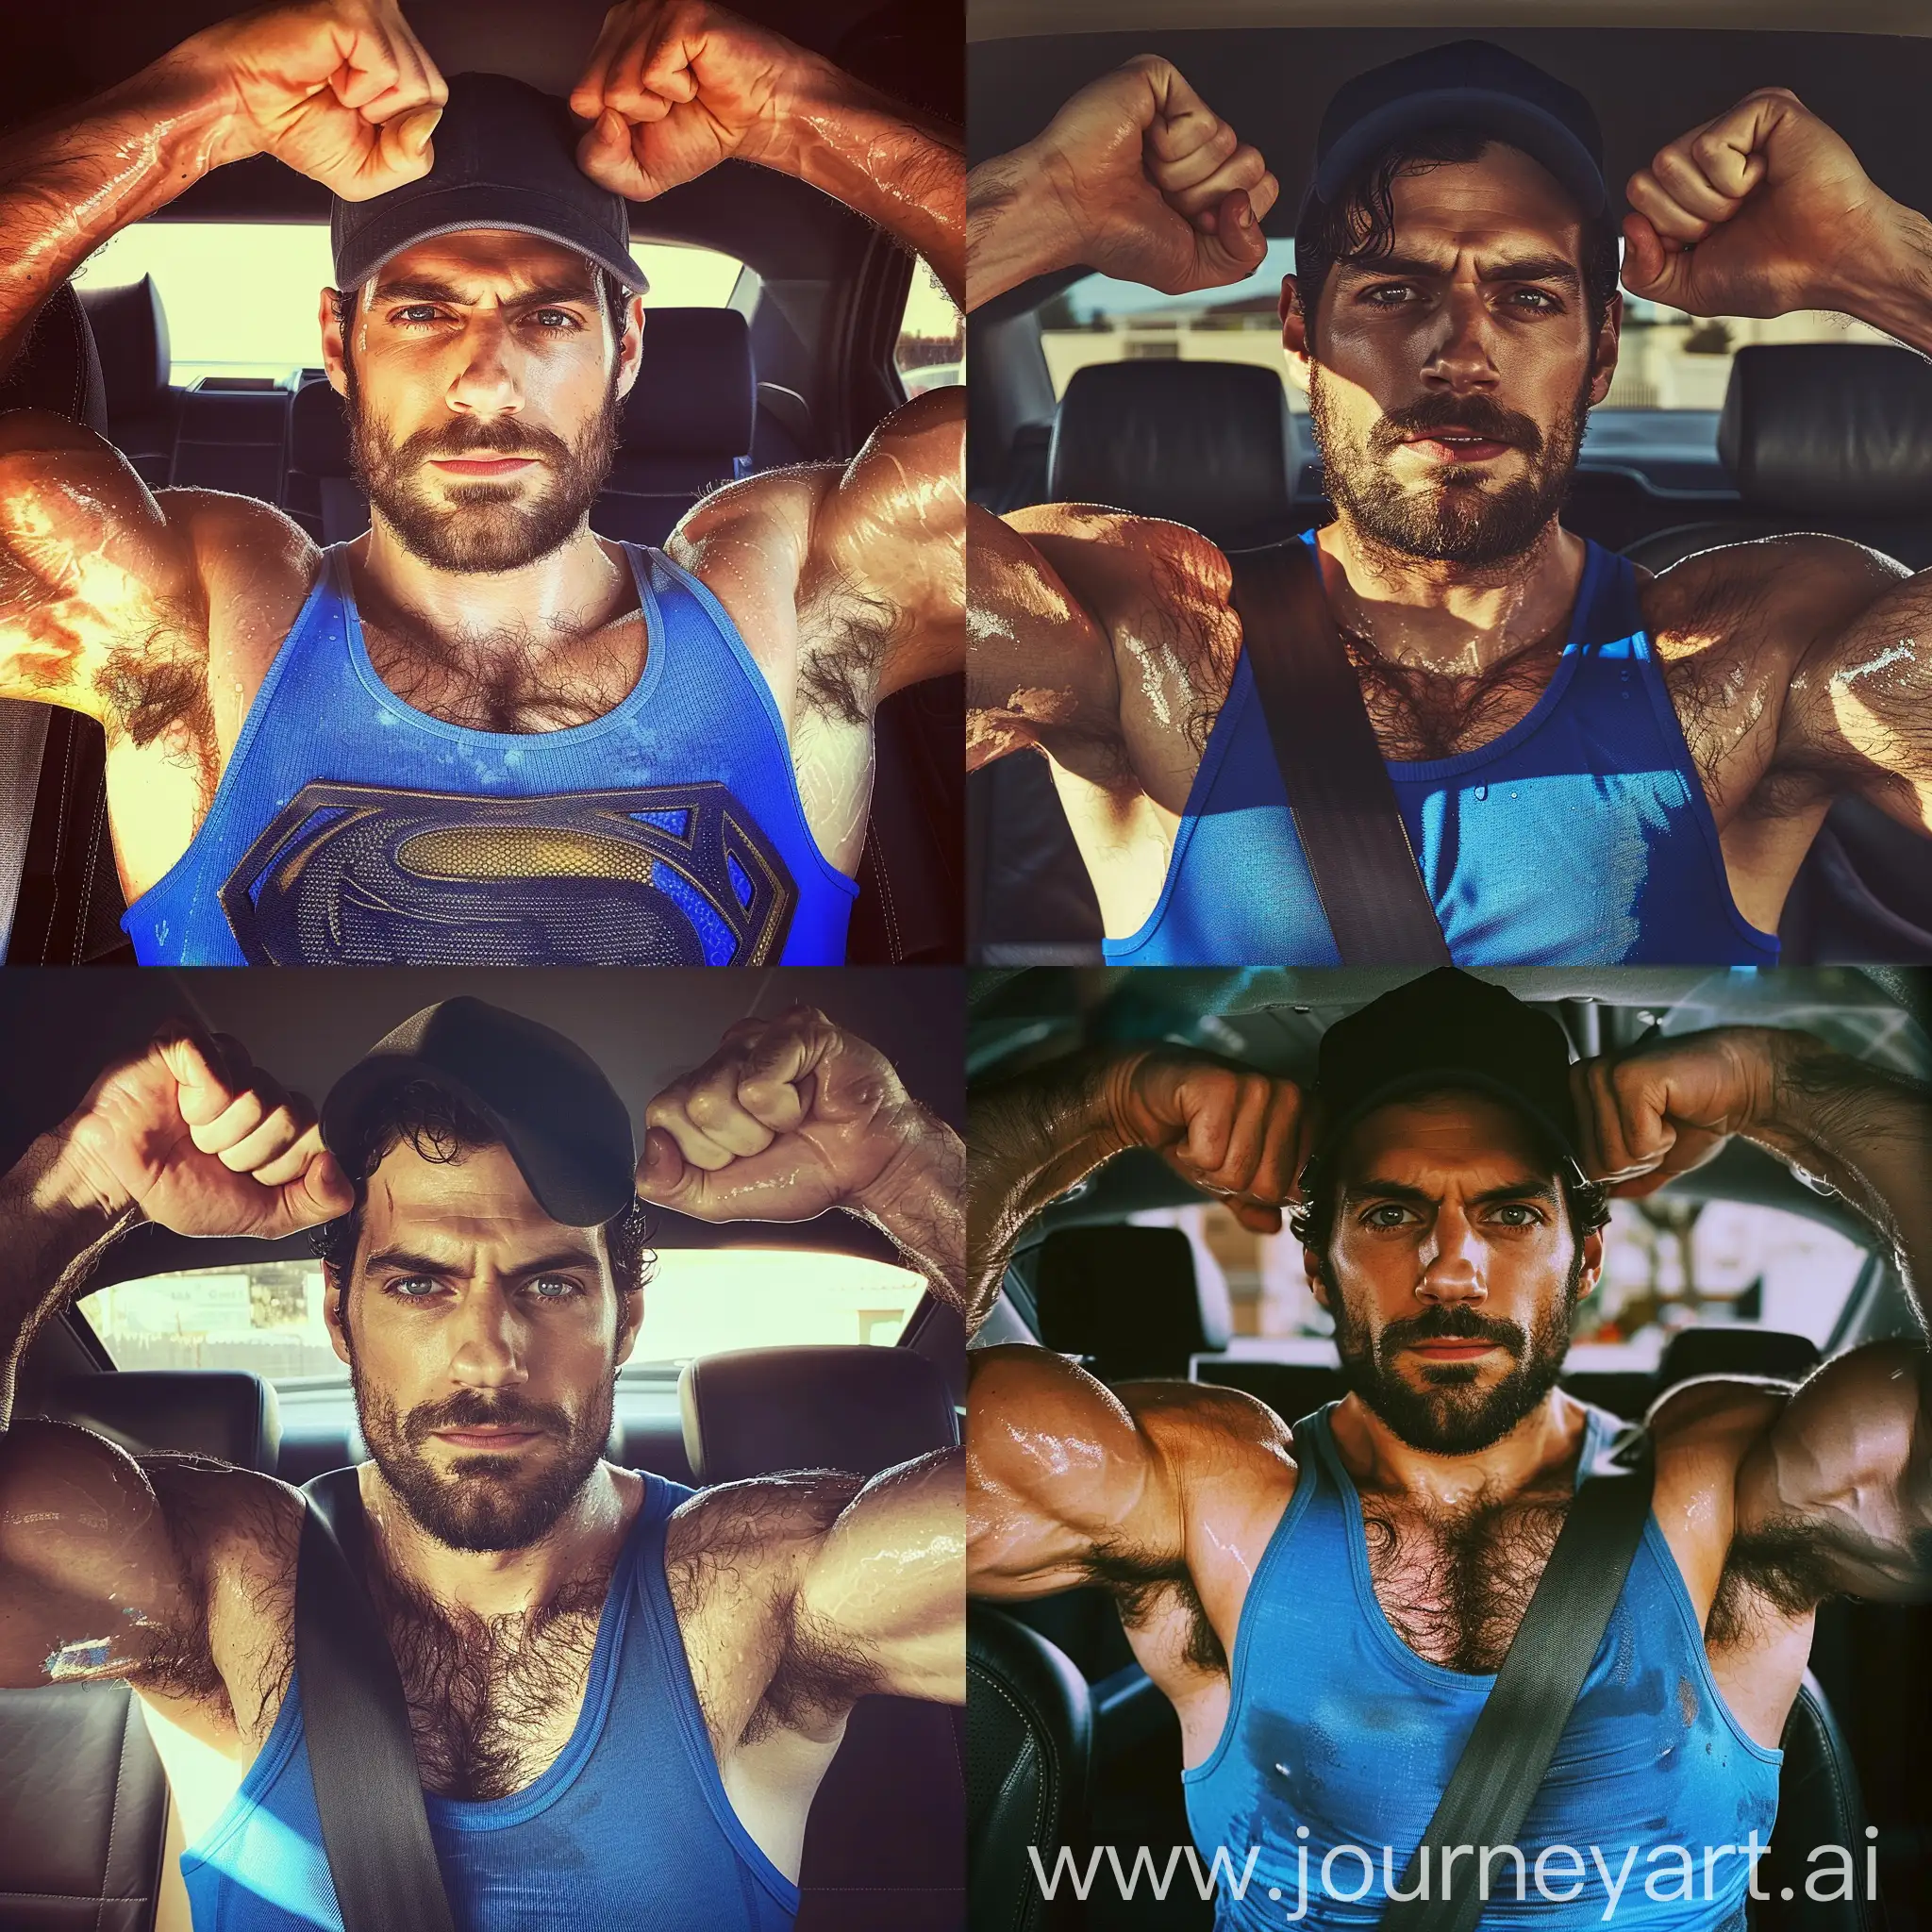 Henry-Cavill-Flexing-Muscles-in-Dimly-Lit-Car-Interior